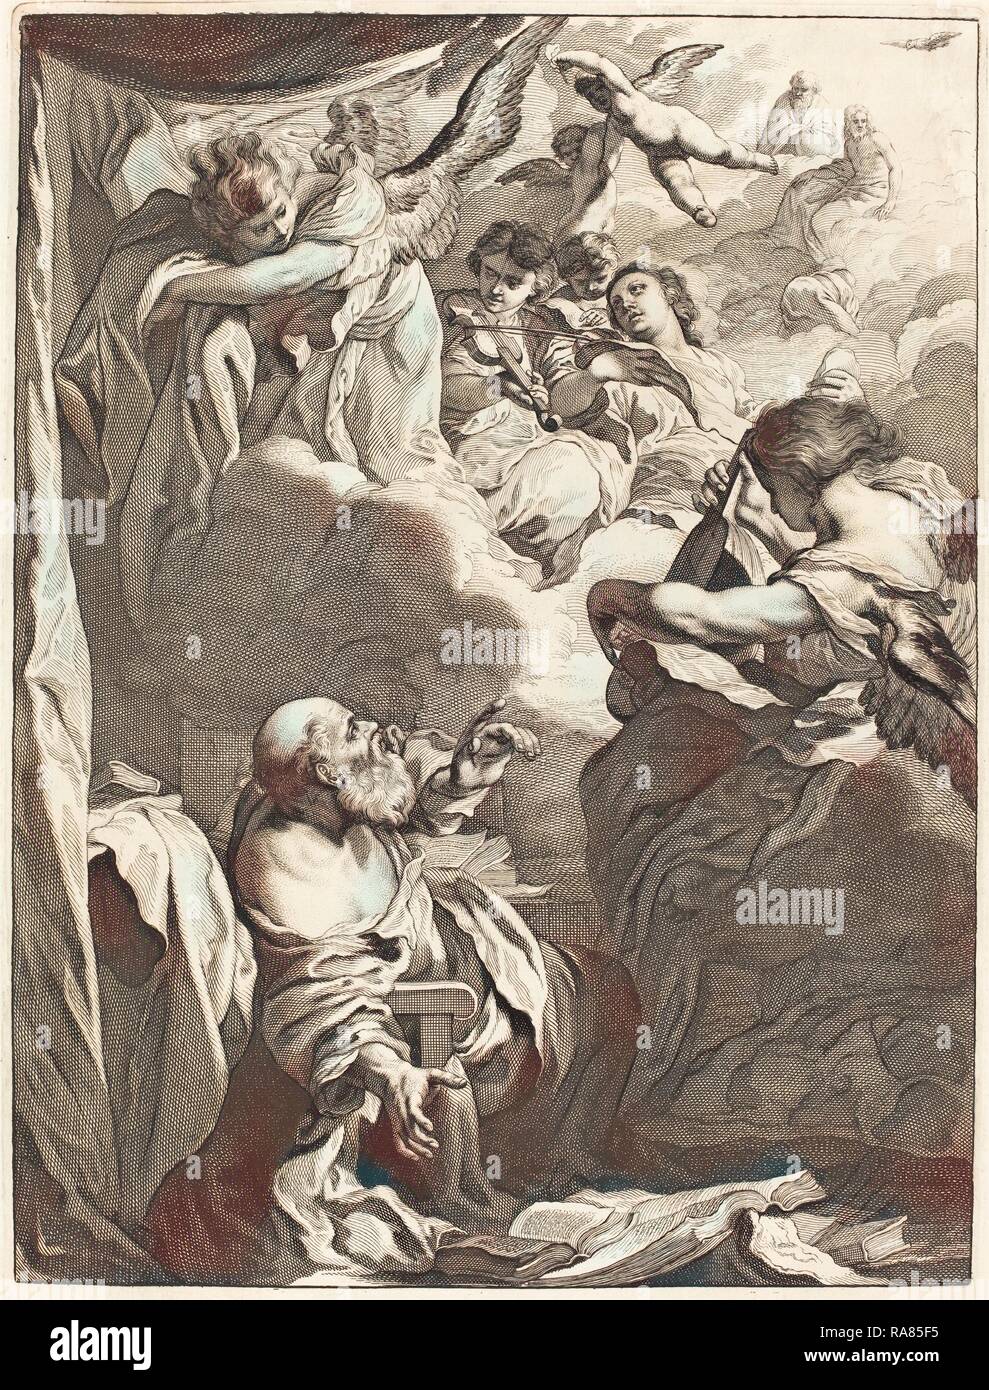 Jeremias Falck (German, c. 1619 - 1677), The Ecstasy of Saint Paul, c. 1655, engraving and etching on laid paper [ reimagined Stock Photo